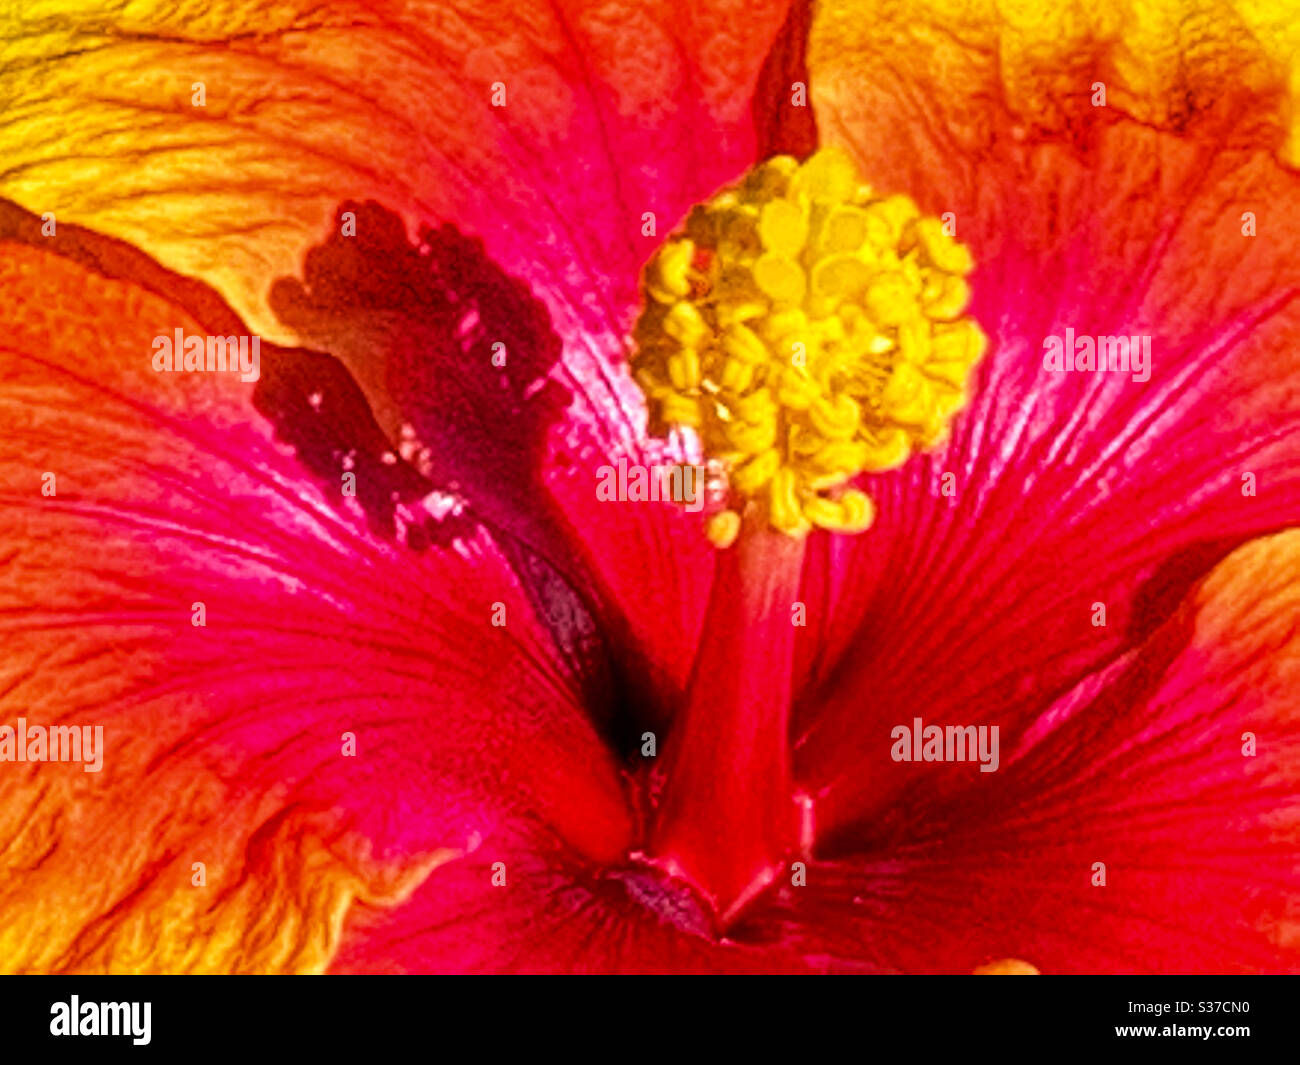 Centre stamen of a bright and vibrantly coloured red pink yellow and orange Hibiscus flower Stock Photo